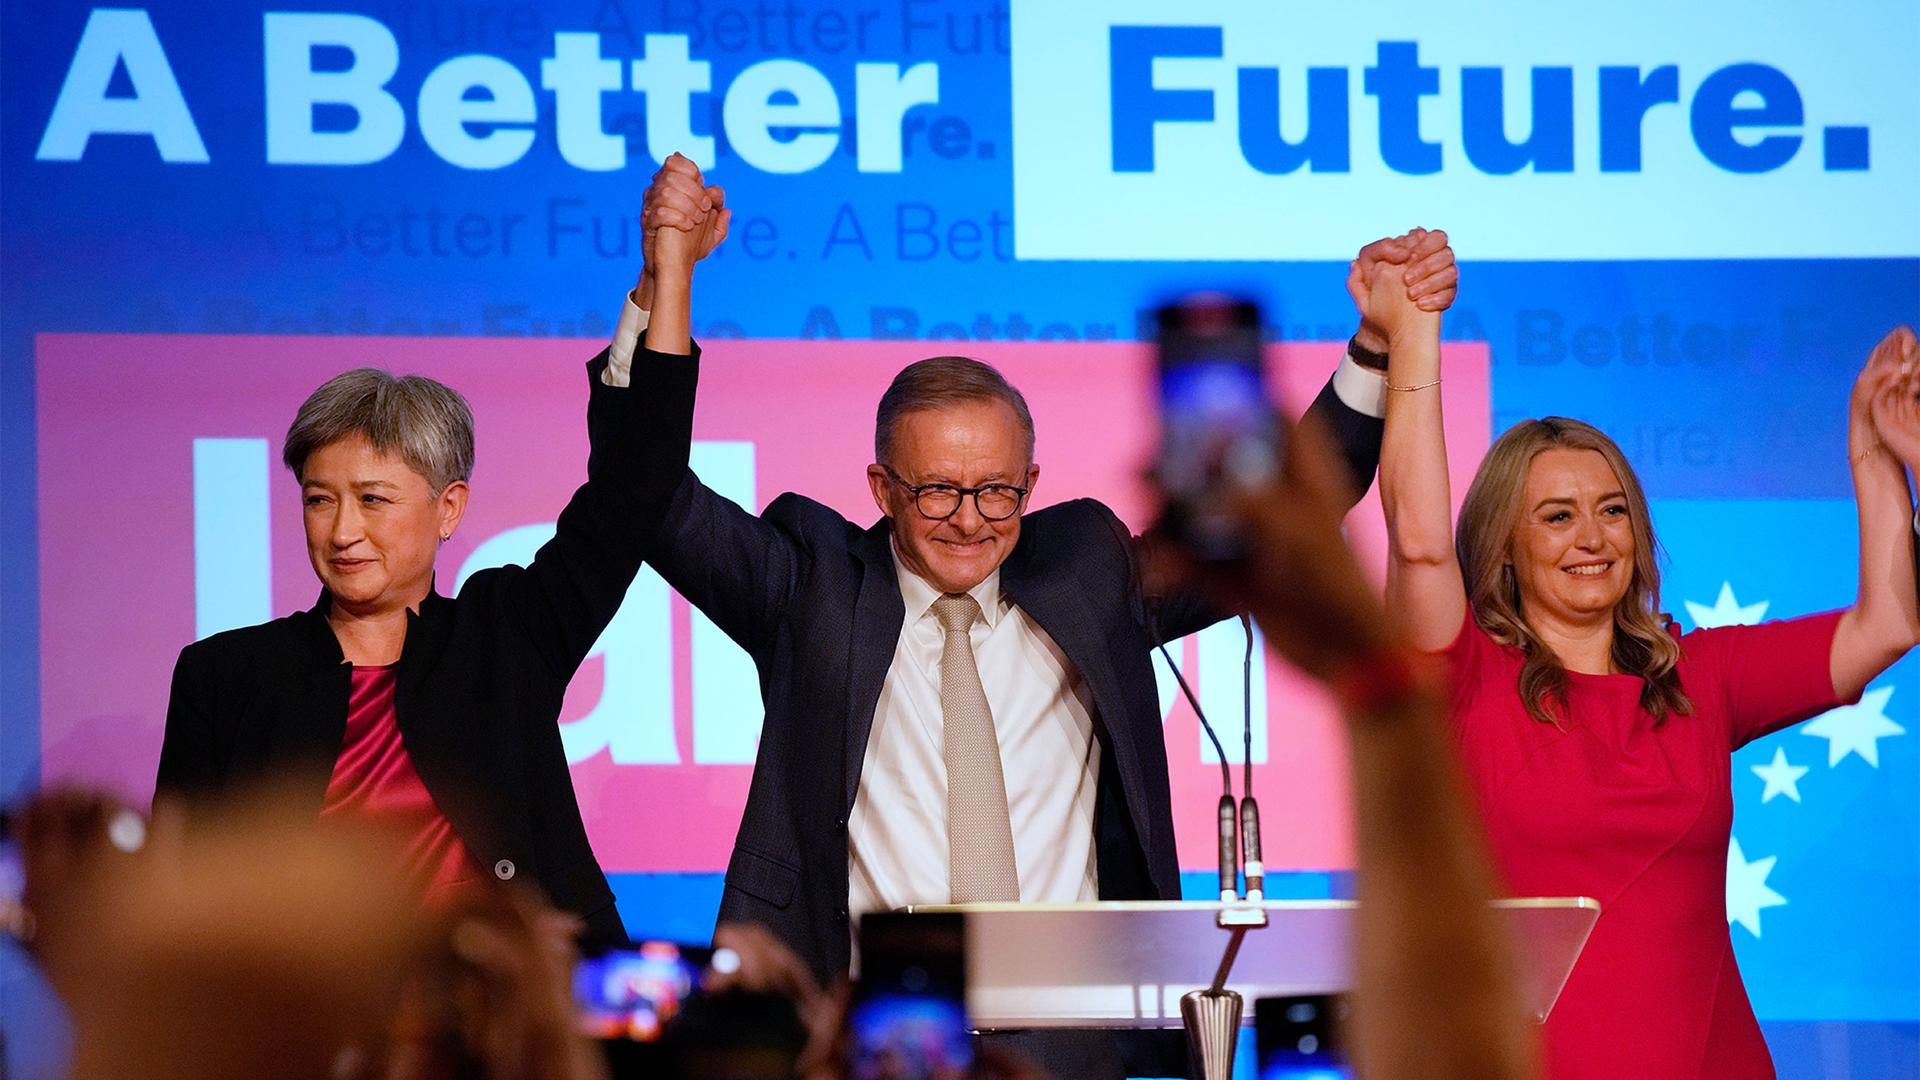 Labor Party leader Anthony Albanese, center back, celebrates with his partner partner Jodie Haydon, right, and Labor senate leader partner Penny Wong at a Labor Party event in Sydney, Australia